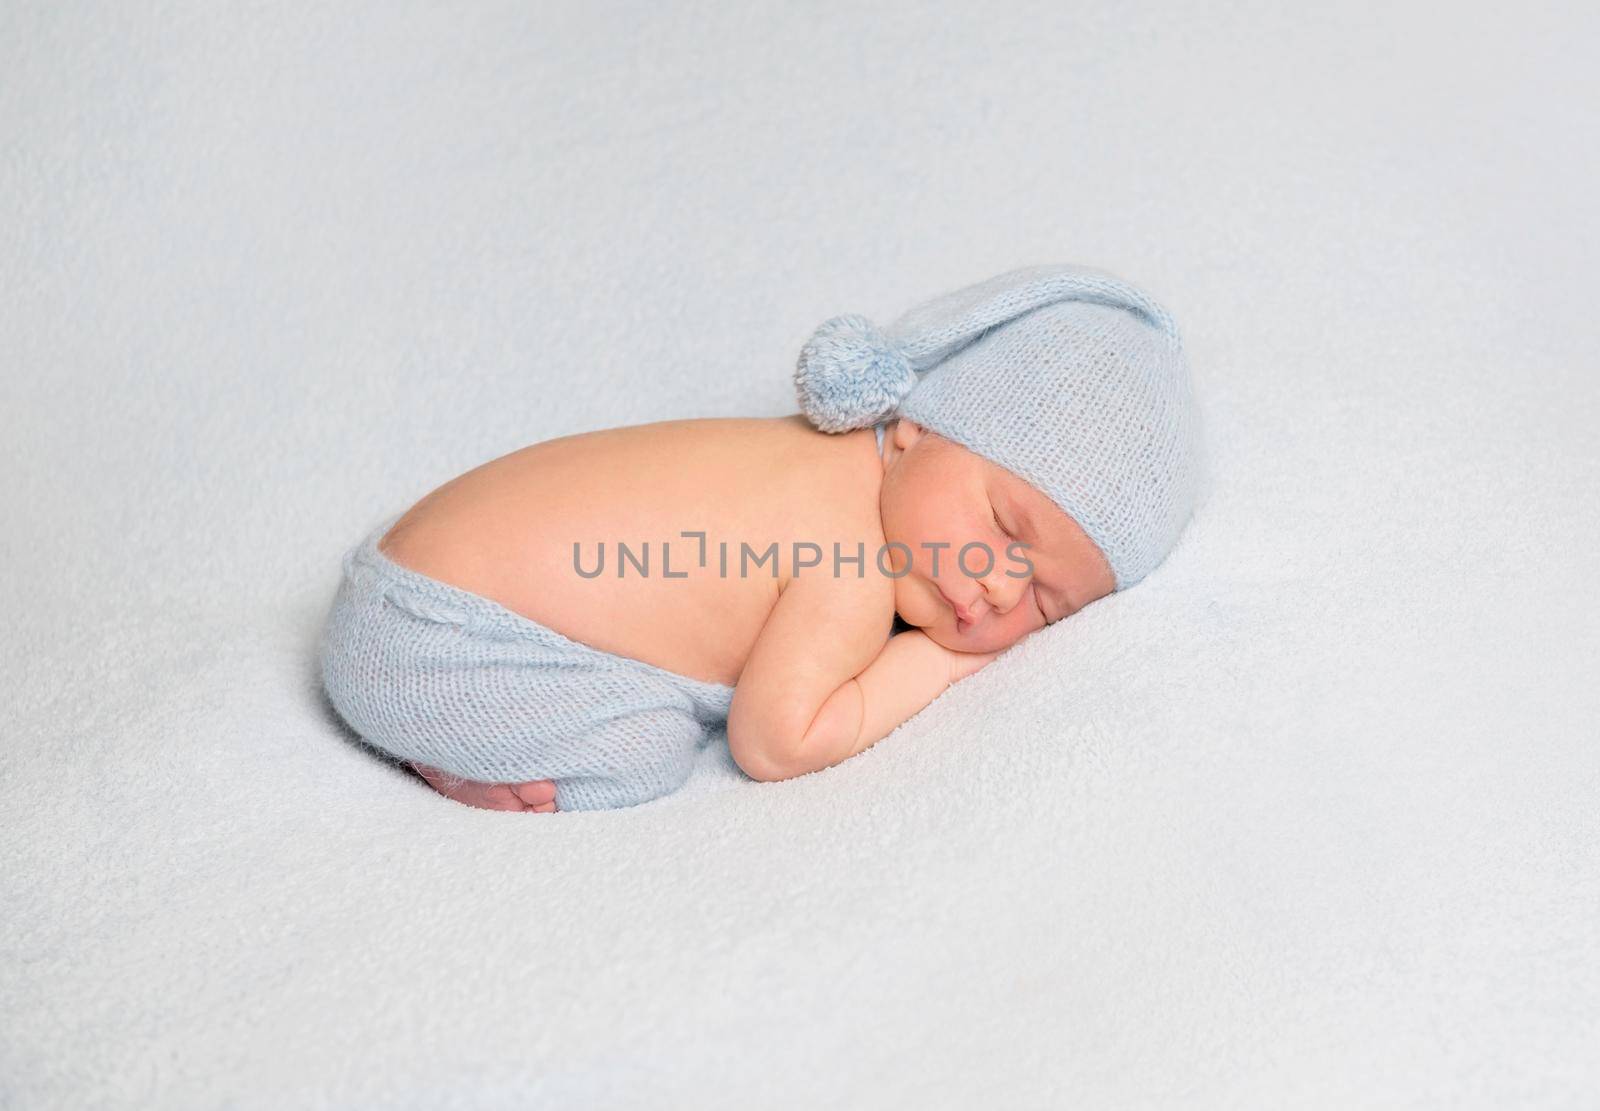 Sleeping baby boy in blue bonnet curled up on white blanket.